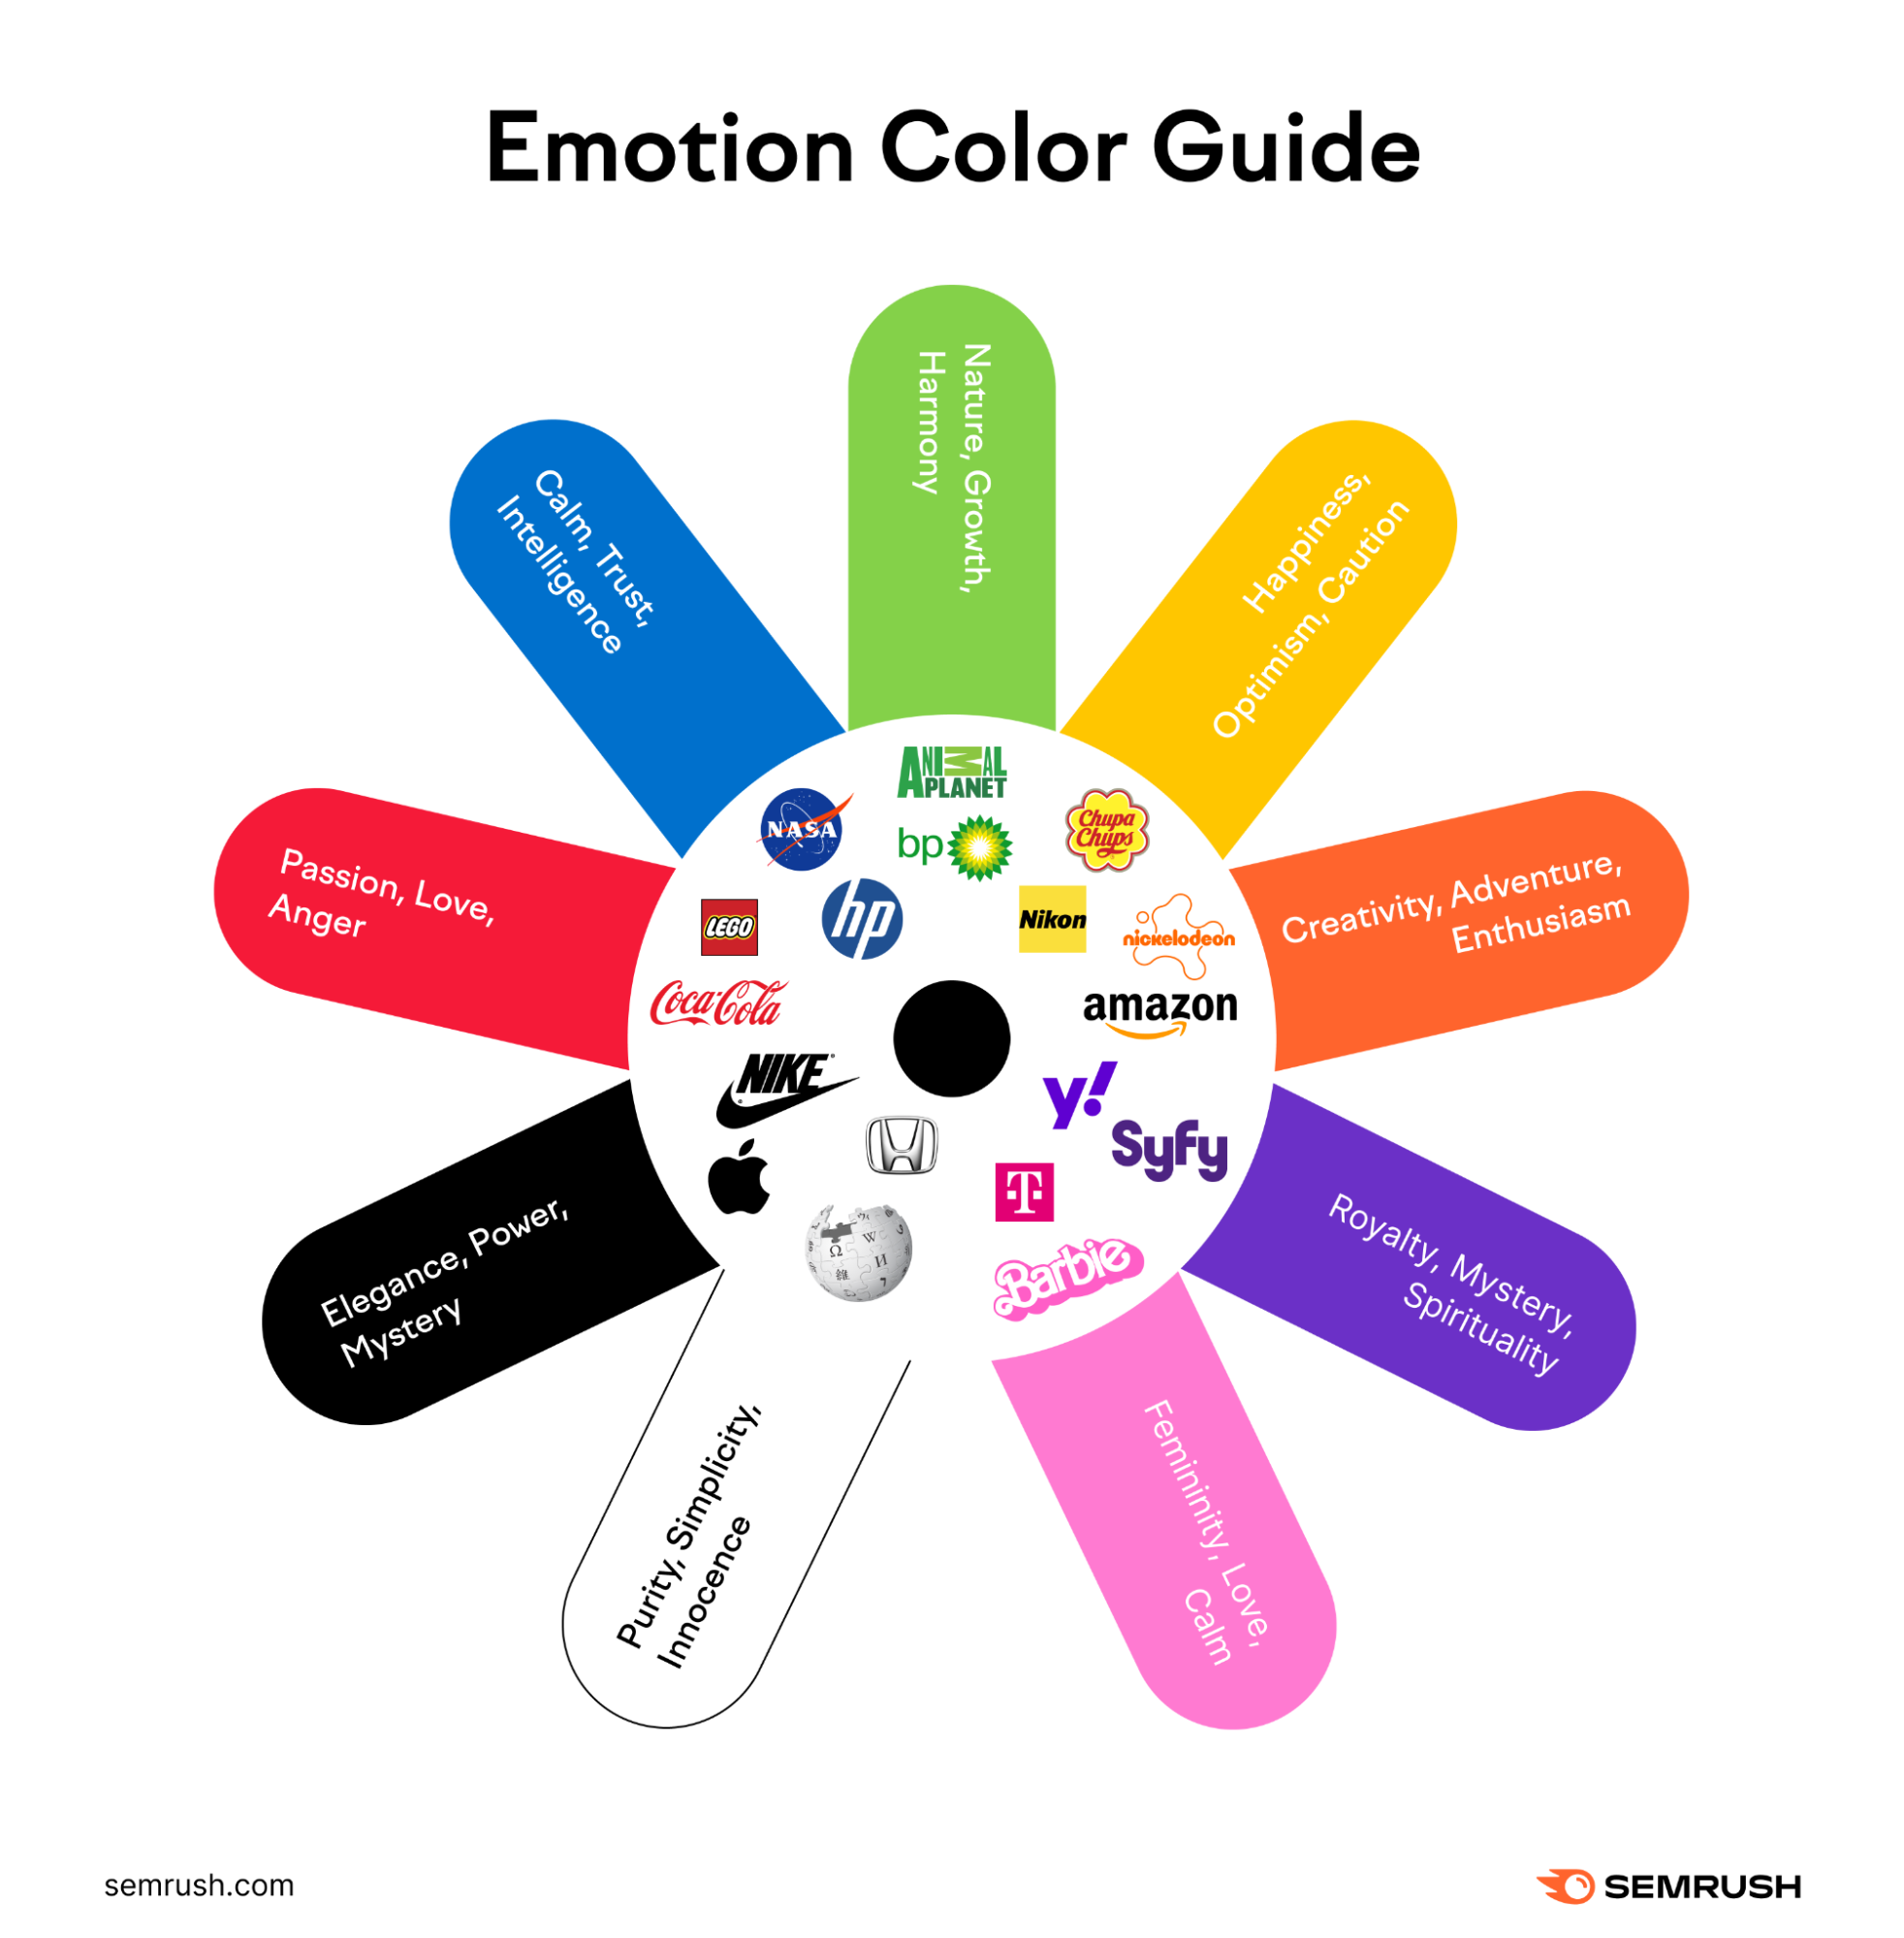 Emotion color guide infographic by Semrush